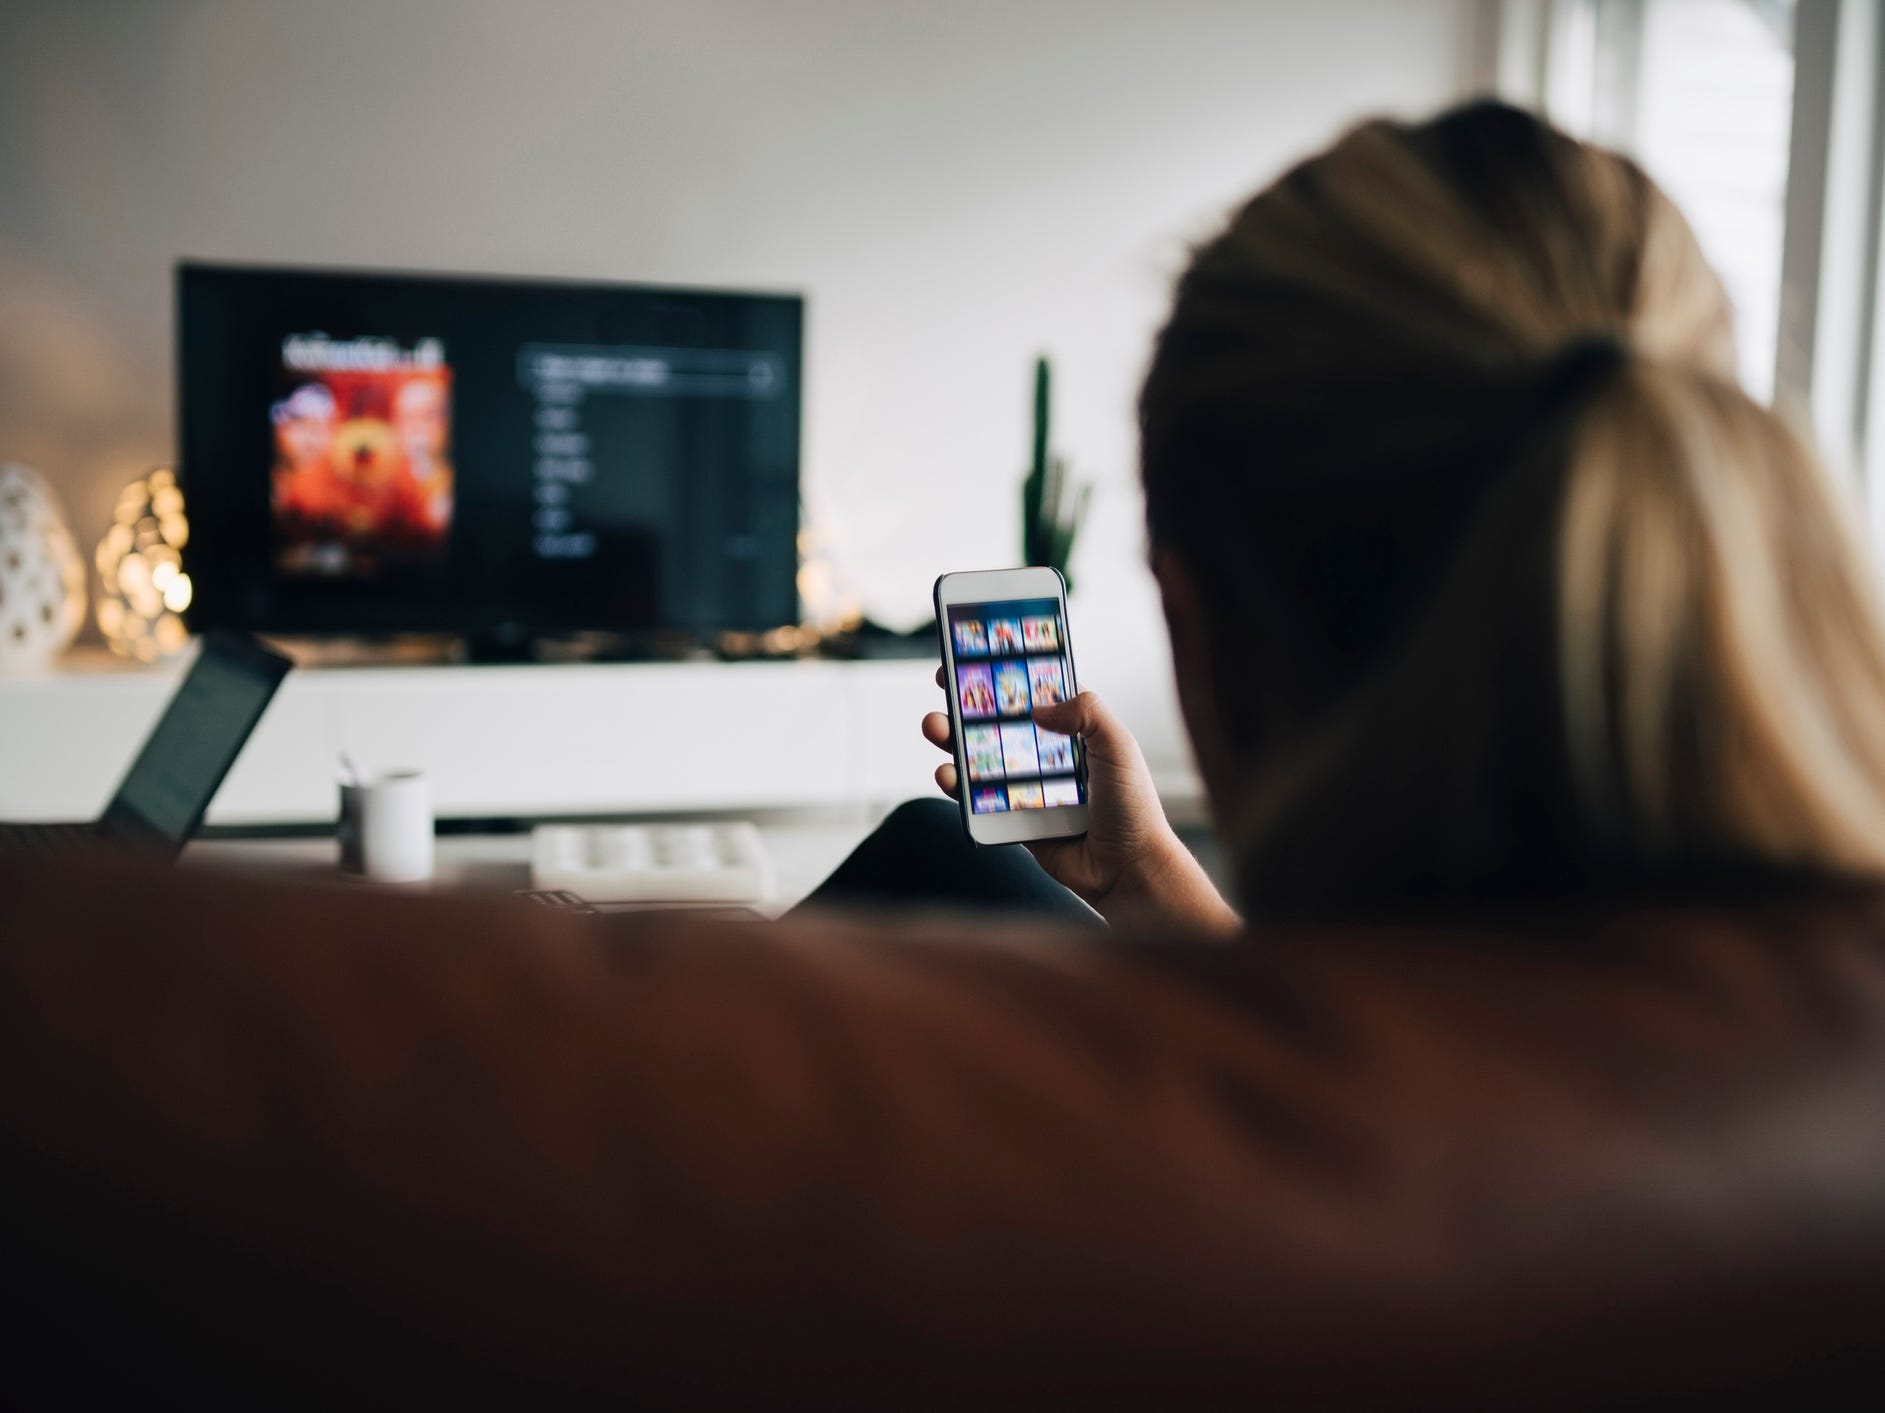 <p>Since the goal is entertainment, choosing the best on-demand streaming service for your needs will largely come down to your personal tastes. However, we can judge the different on-demand platforms based on a few common factors, like their library size, selection of critically acclaimed exclusives, video quality, app functionality, and price.</p><p>The best on-demand streaming services have set a standard for 4K video quality, with support for <a href="https://www.businessinsider.com/guides/tech/what-is-hdr-tv" rel="noopener">HDR color and contrast</a> on compatible TVs. TV channels rarely broadcast in 4K, so we have lower expectations for live TV streaming services, which still use HD resolutions like 1080p or 720p.</p><p>Quality can still vary based on the movie or show being streamed, and you'll need a strong, stable internet connection to stream consistently at 4K. Even if you don't have a 4K TV, these services will still deliver the best possible quality for your setup.</p><p>We expect app support on iOS, Android, and most home entertainment devices. The best on-demand services also give subscribers an option to save select movies for offline viewing while they travel, though an online check-in is still required occasionally.</p><p>When comparing catalogs, we try to consider the range of entertainment offered by each streaming service, how much the platform has invested in exclusive programming, and which age ranges are best suited to watch. While most streaming services will have a rotating list of movies, it's important to pay attention to which series and franchises will remain platform exclusive, like "The Office," "Star Wars," and "Stranger Things."</p>